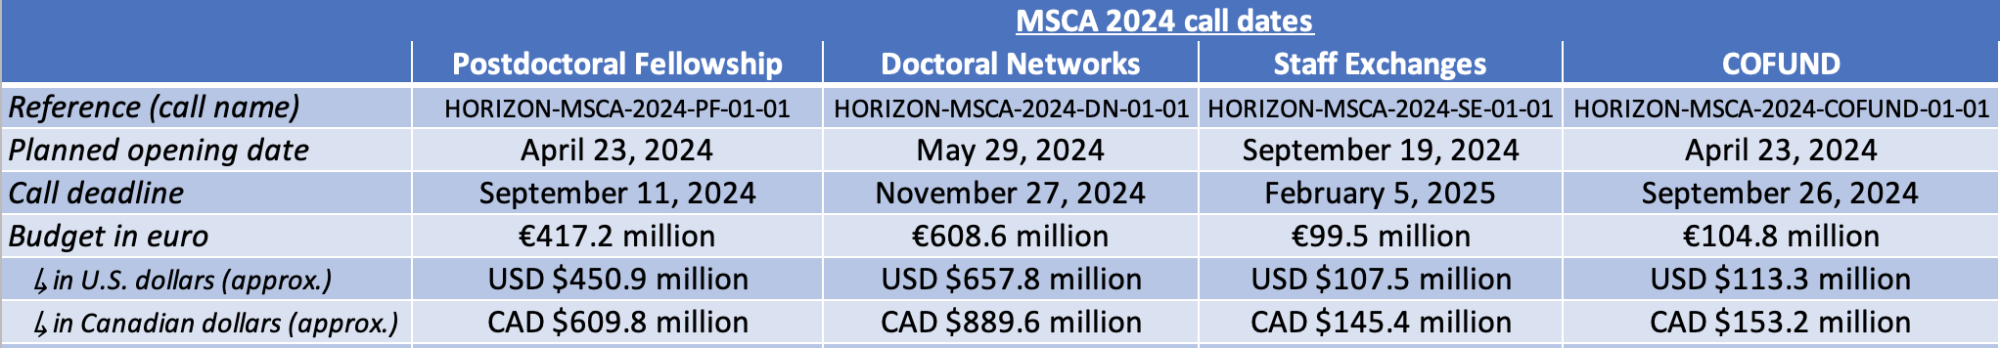 MSCA 2024 call dates table